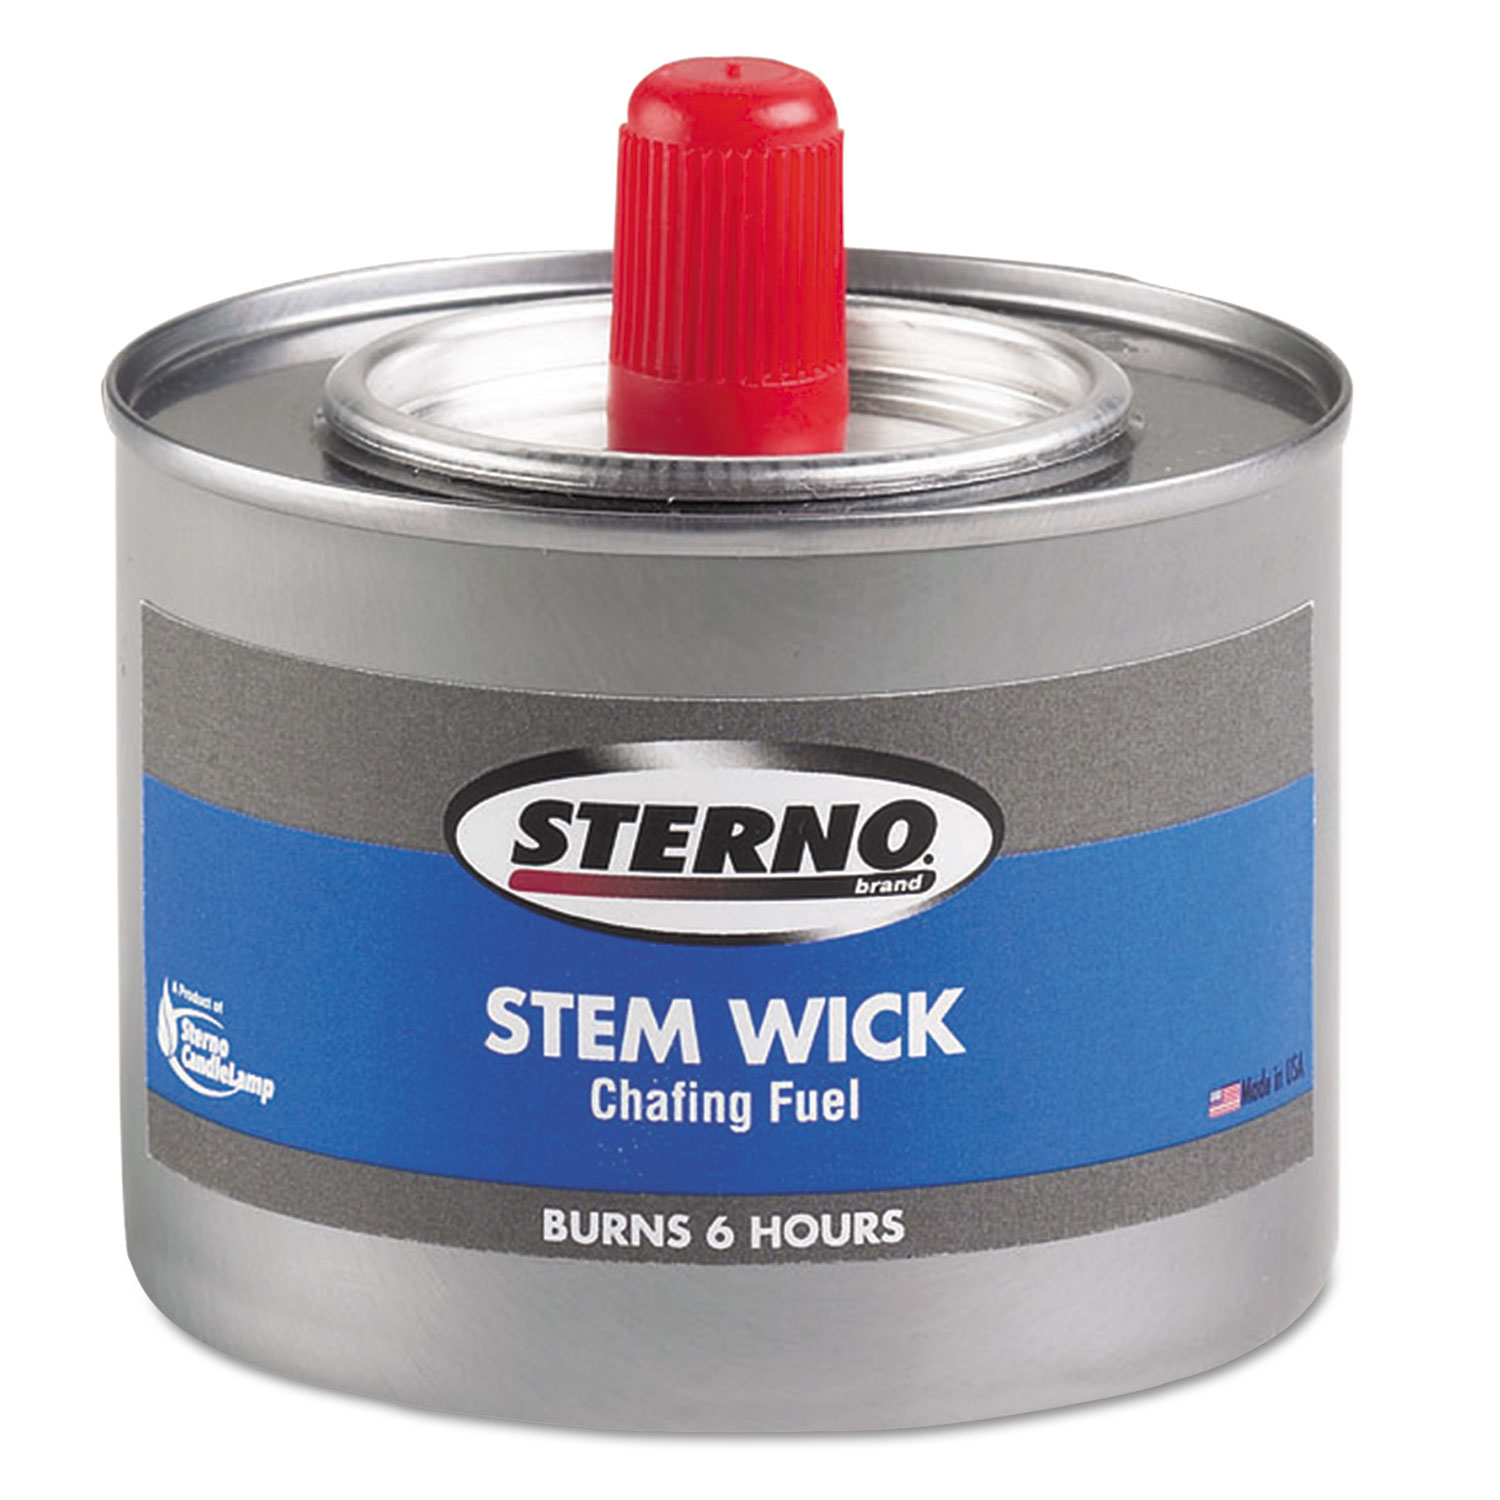  Sterno STE 10102 Chafing Fuel Can With Stem Wick, Methanol,1.89g, Six-Hour Burn, 24/Carton (STE10102) 